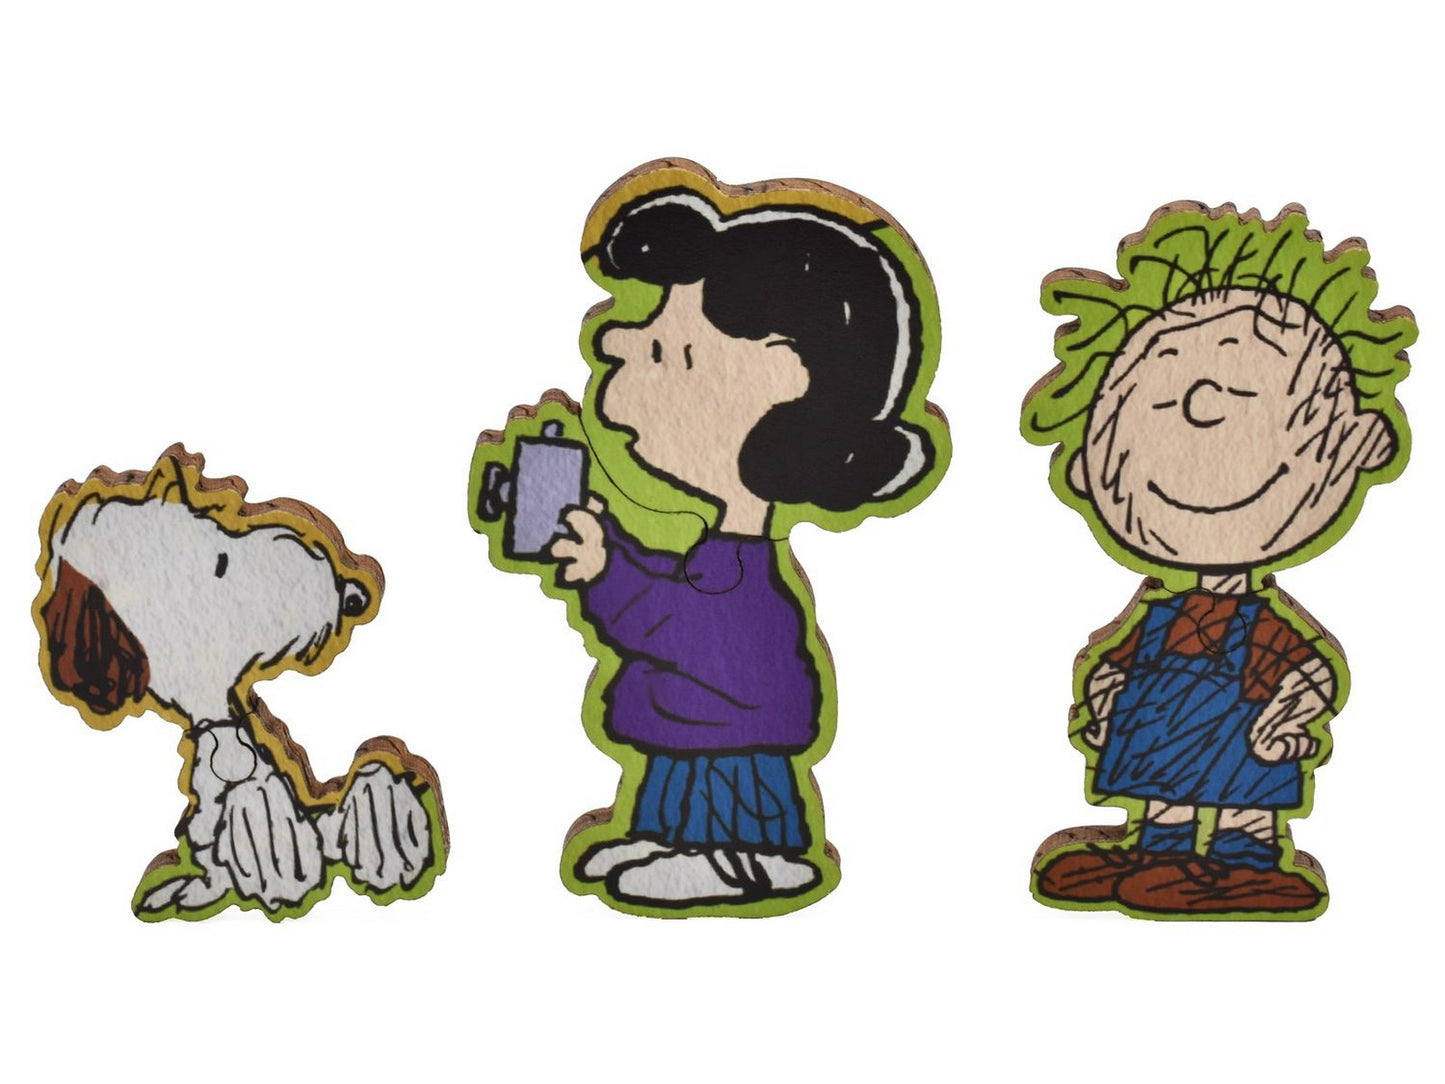 A closeup of pieces in the shape of Andy, Lucy, and Pig Pen.